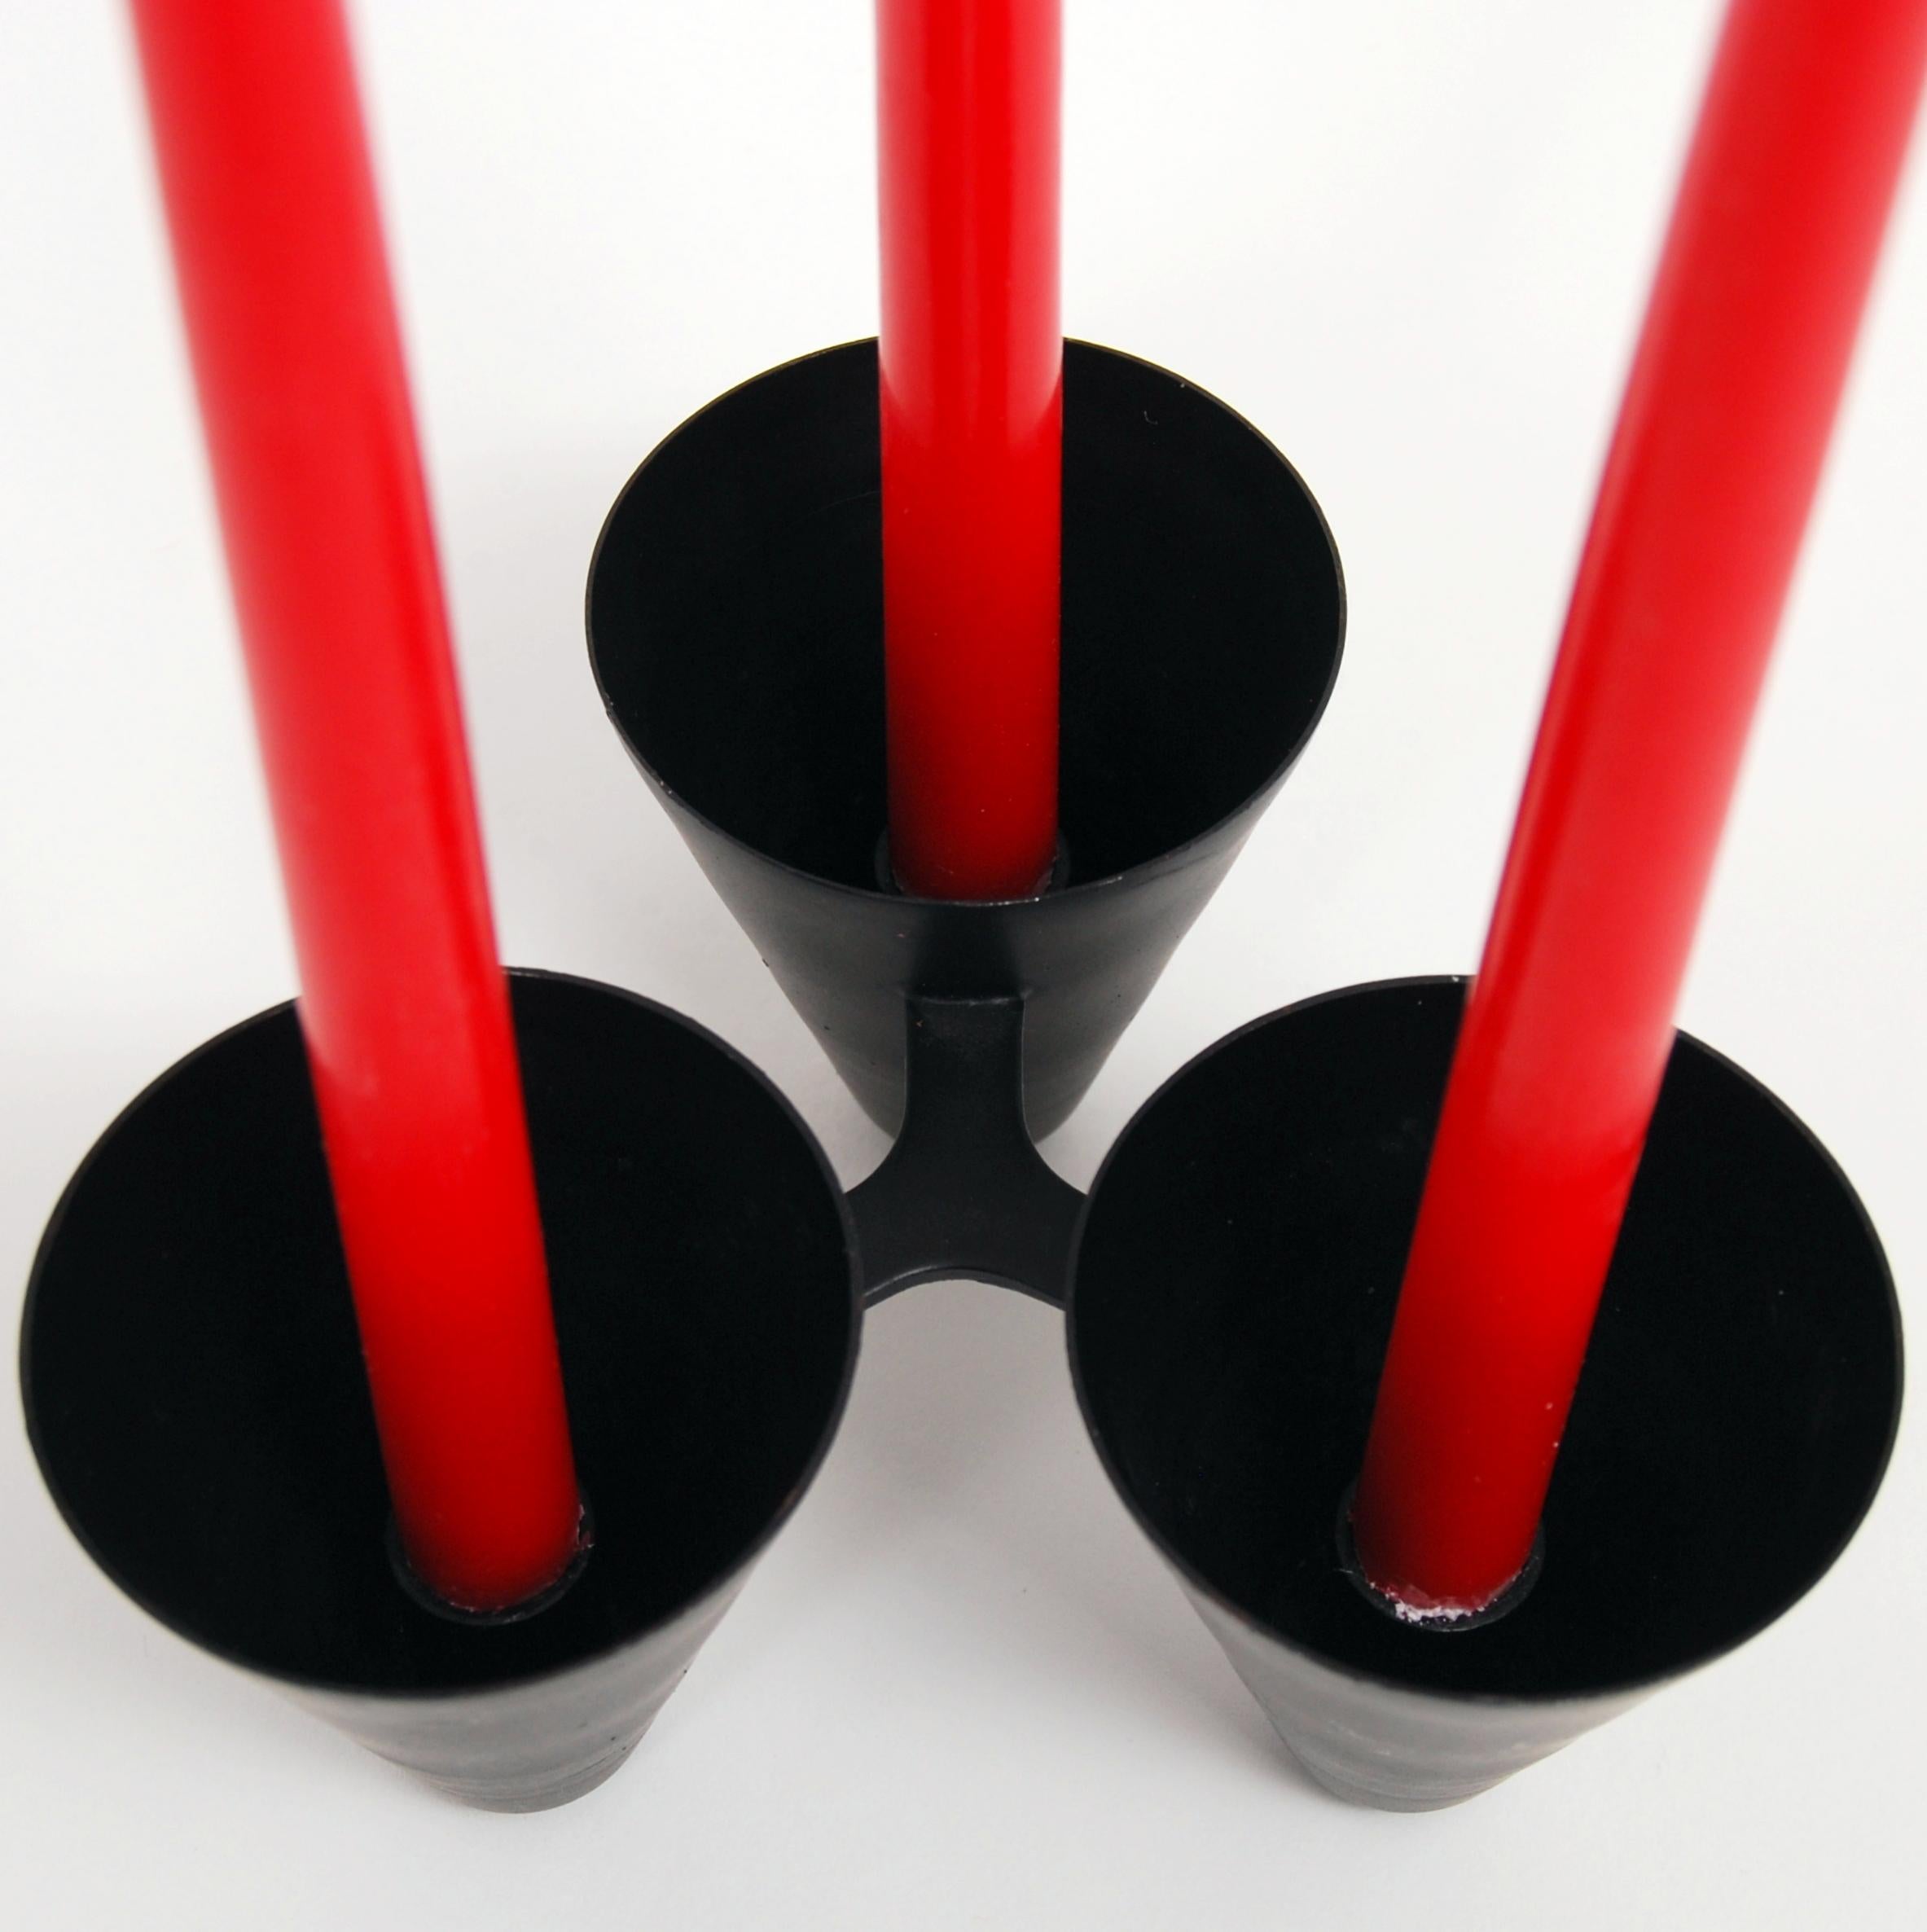 A Gunnar Ander candleholder in black metal for three candles. Manufactured by Ystad Metall.
 